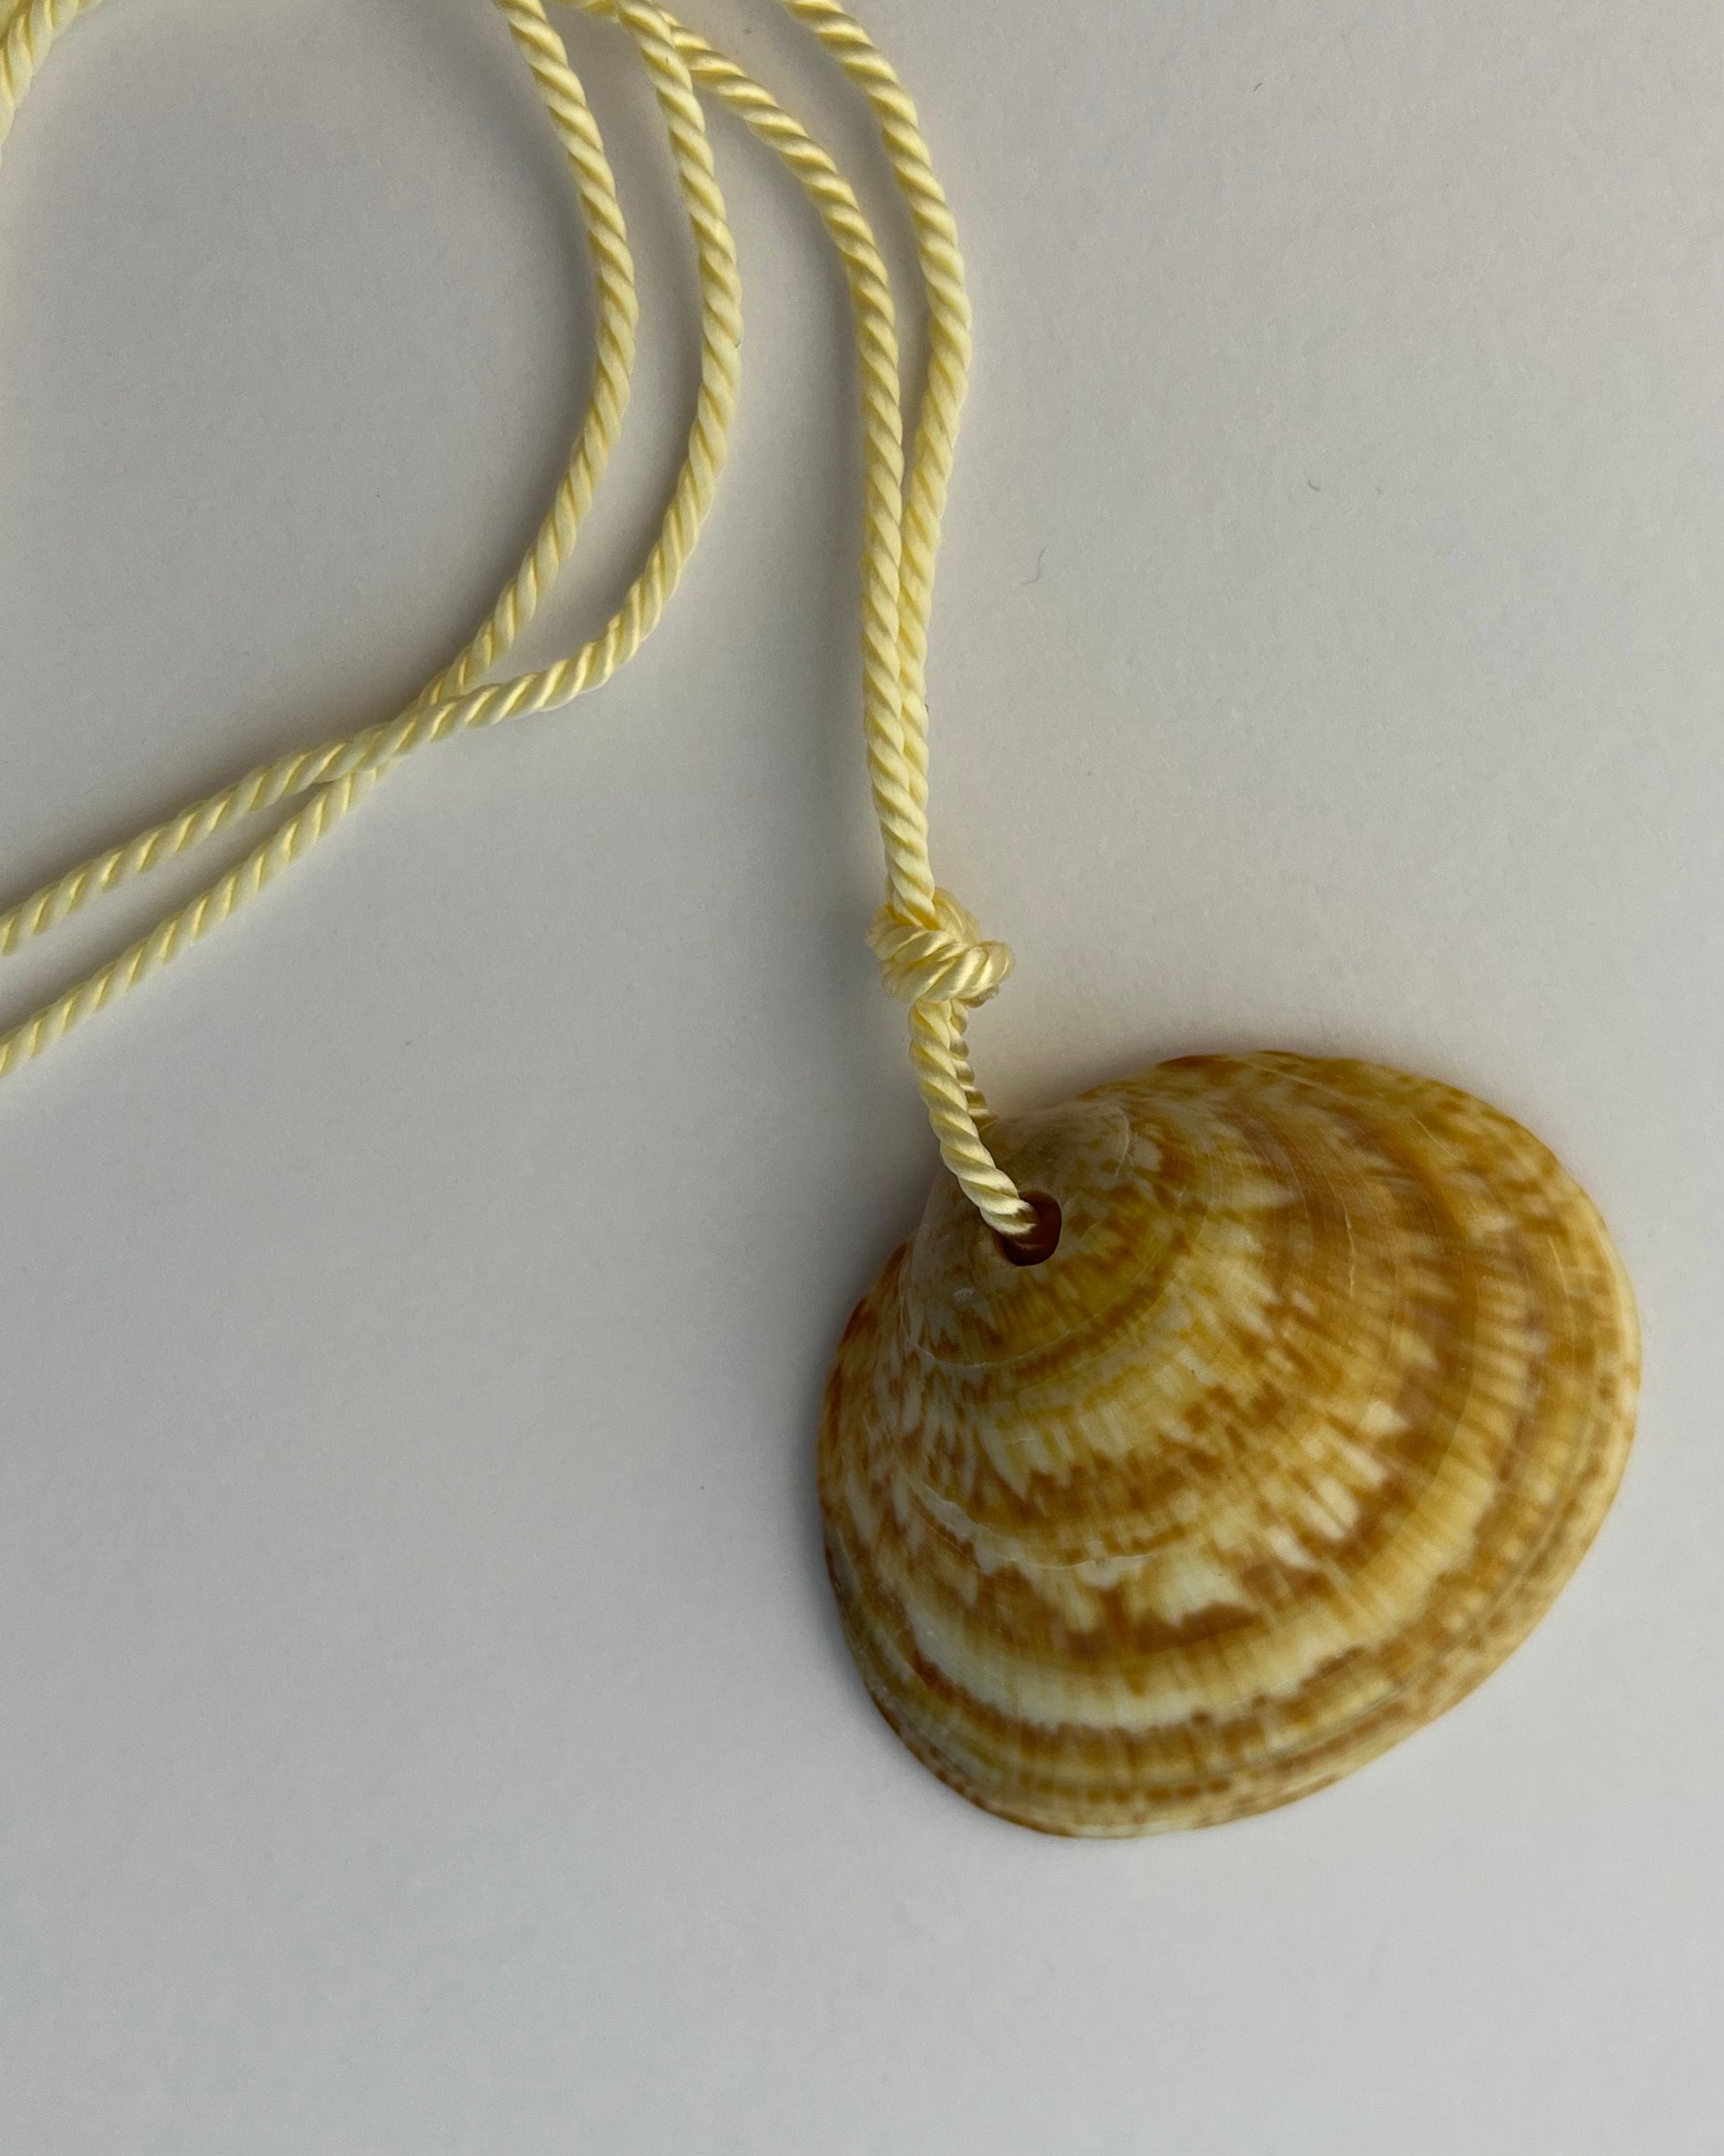 16 the sun shell pendant on cream string – Thing by Susi Best